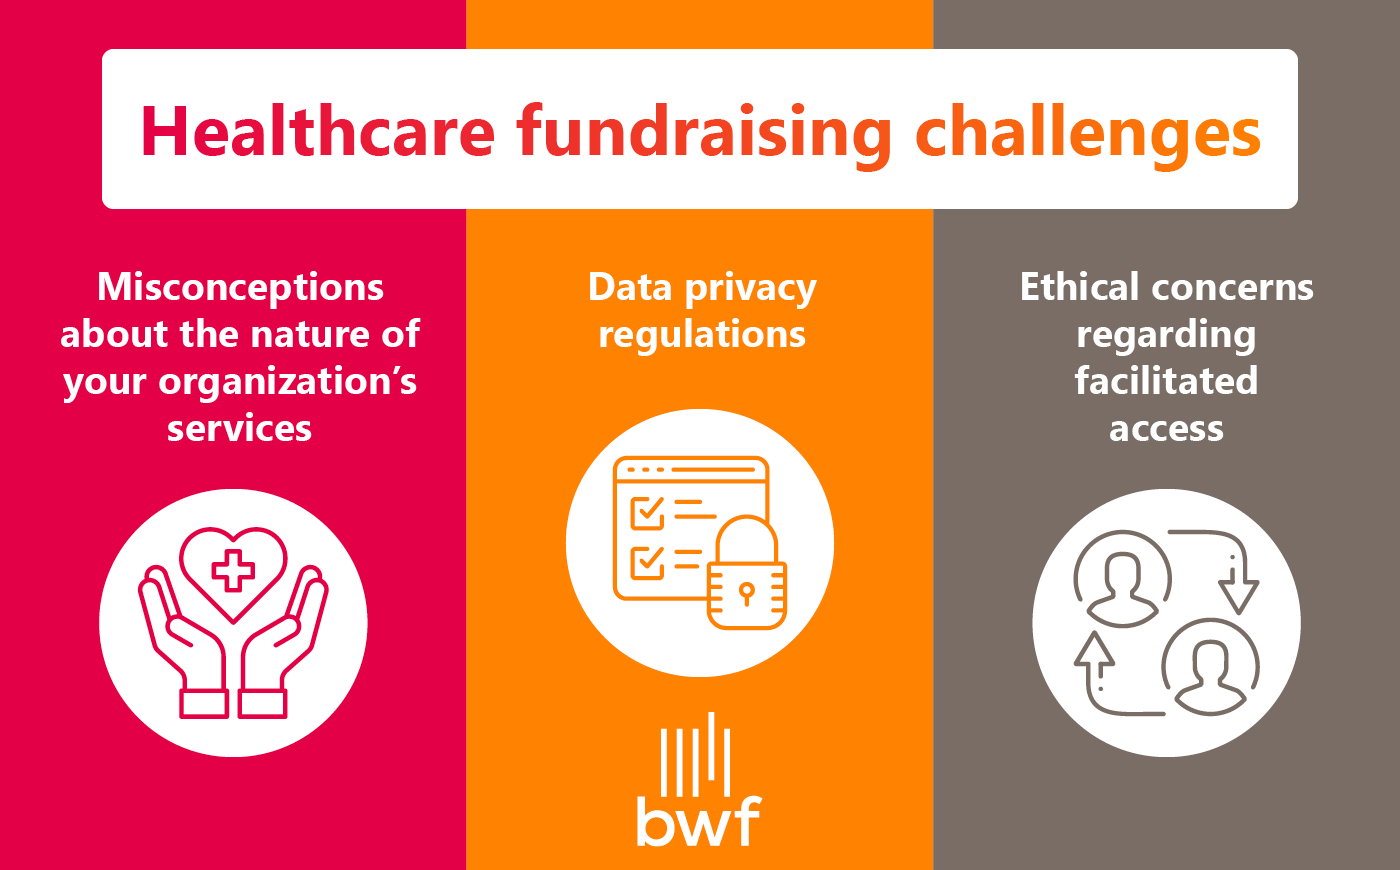 This image shows common challenges associated with healthcare fundraising. 